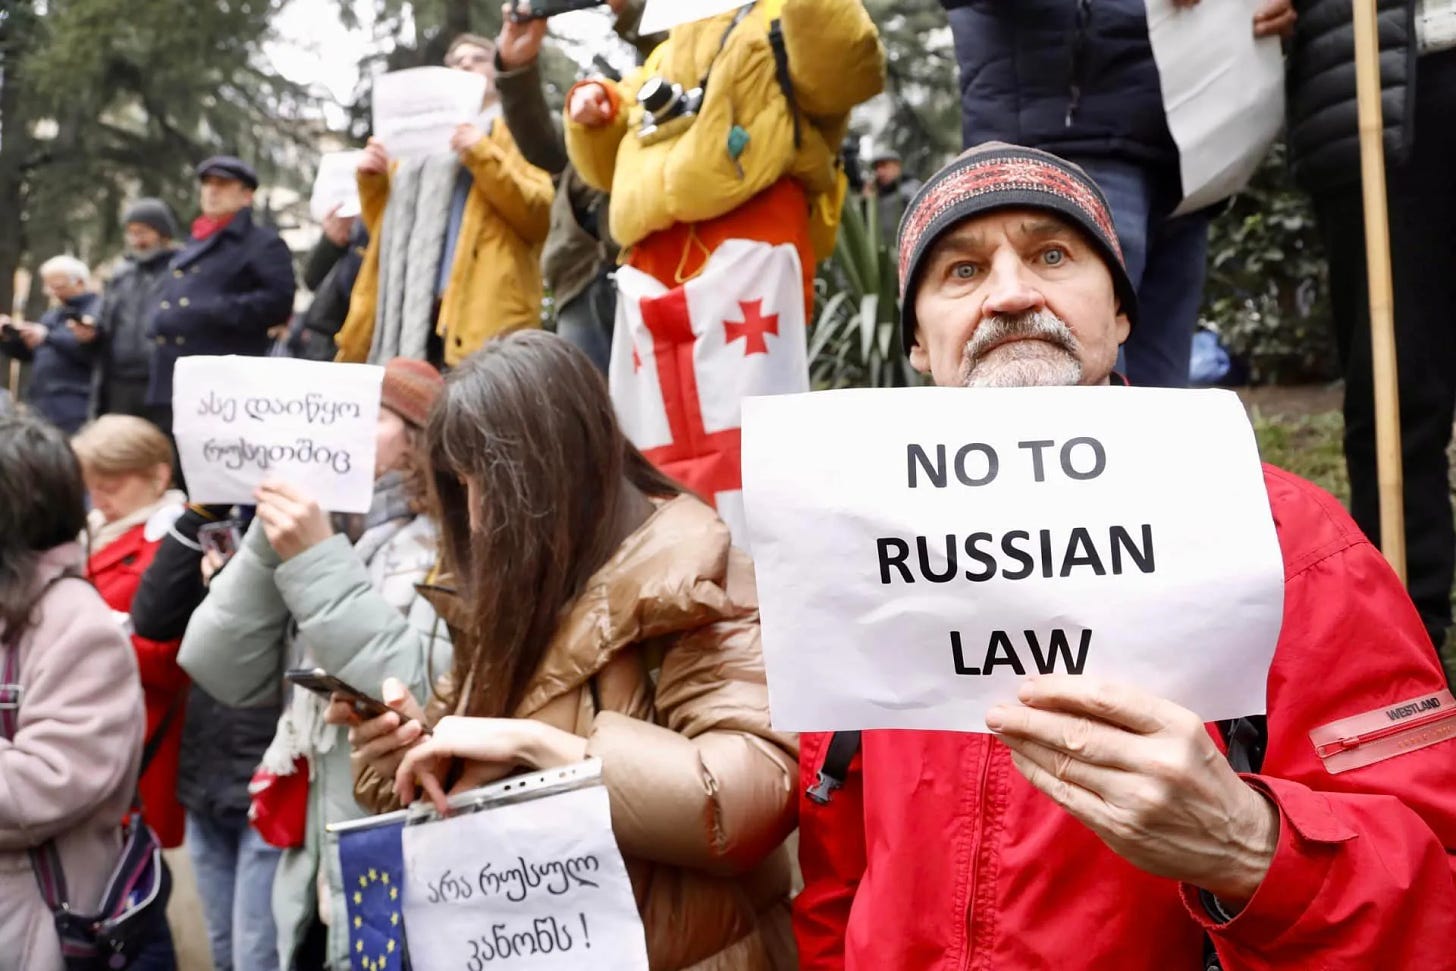 A protest against the "Russian Law". One sign says "No to Russian Law" in English, one says the same in Georgian, and one says "This is also how it started in Russia" in Georgian.